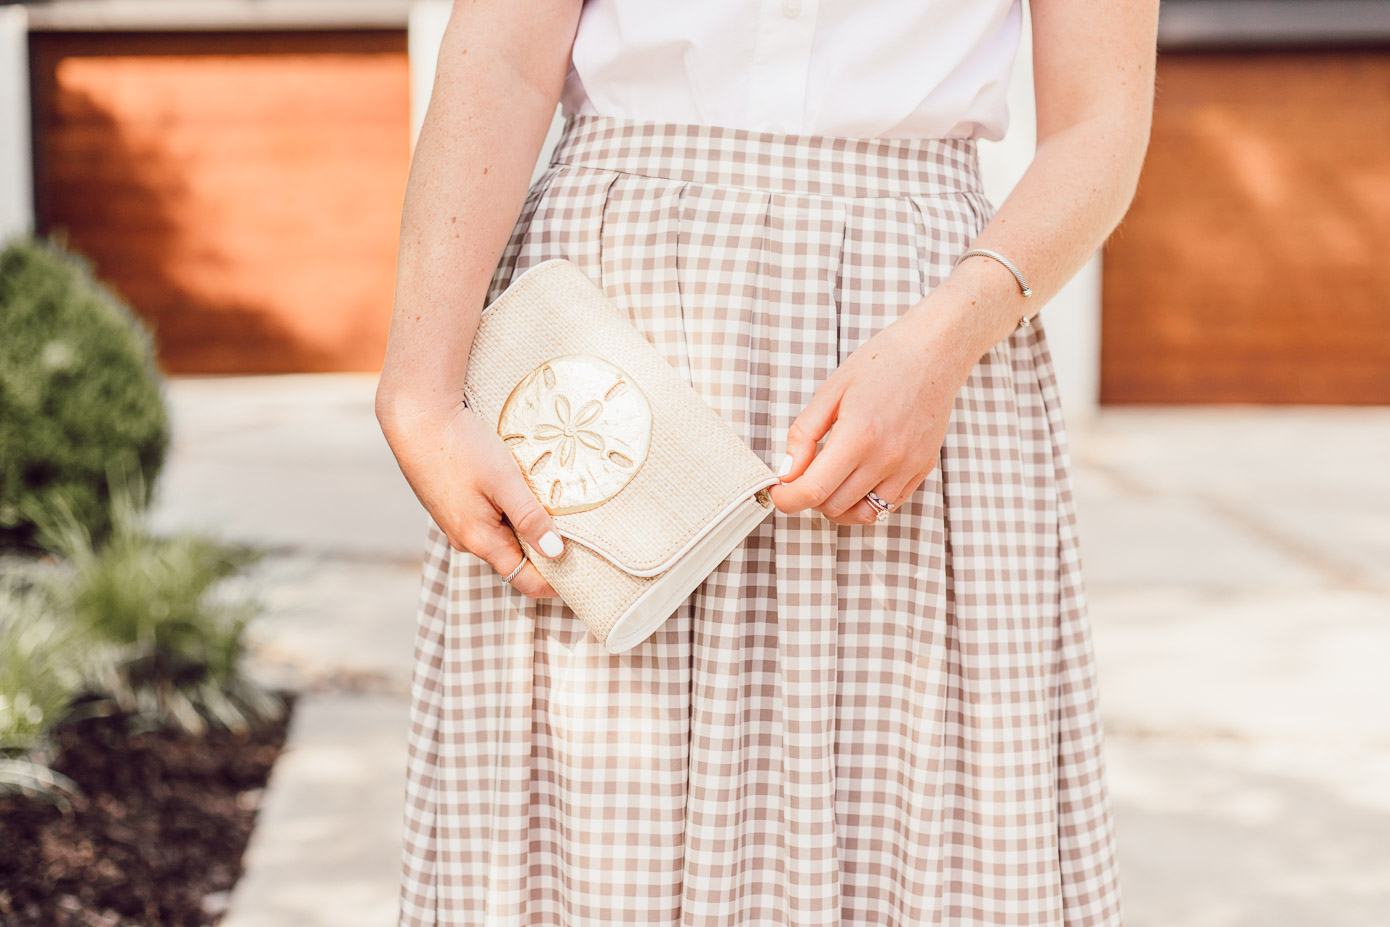 Lisi Lerch Raffia Clutch - A Summer Gingham Maxi Skirt styled by Laura Leigh of Louella Reese #maxiskirt #gingham #southernstyle